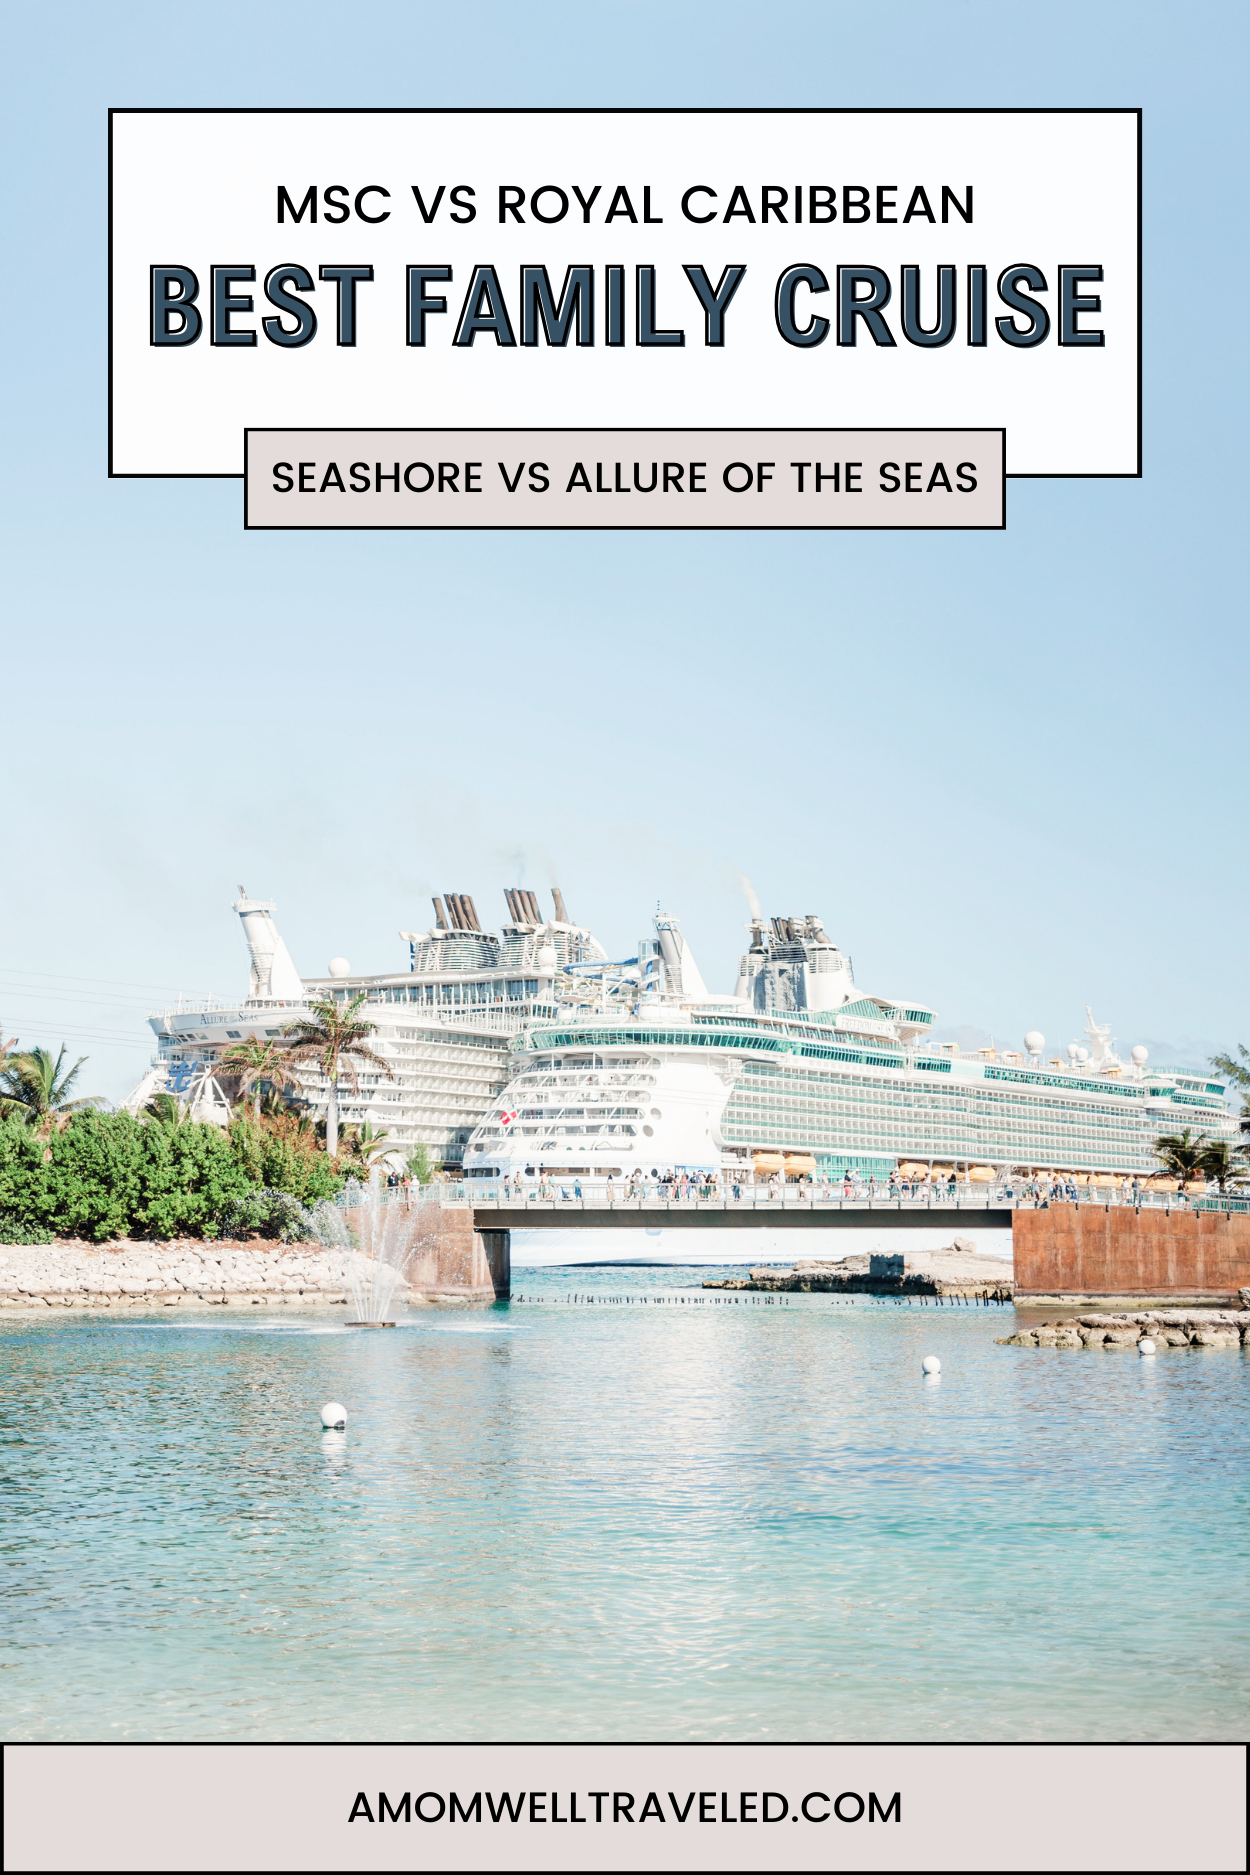 MSC vs Royal Caribbean: Which cruise from Port Canaveral is BEST for families? Discover the key differences and determine which you should book for your first family cruise!